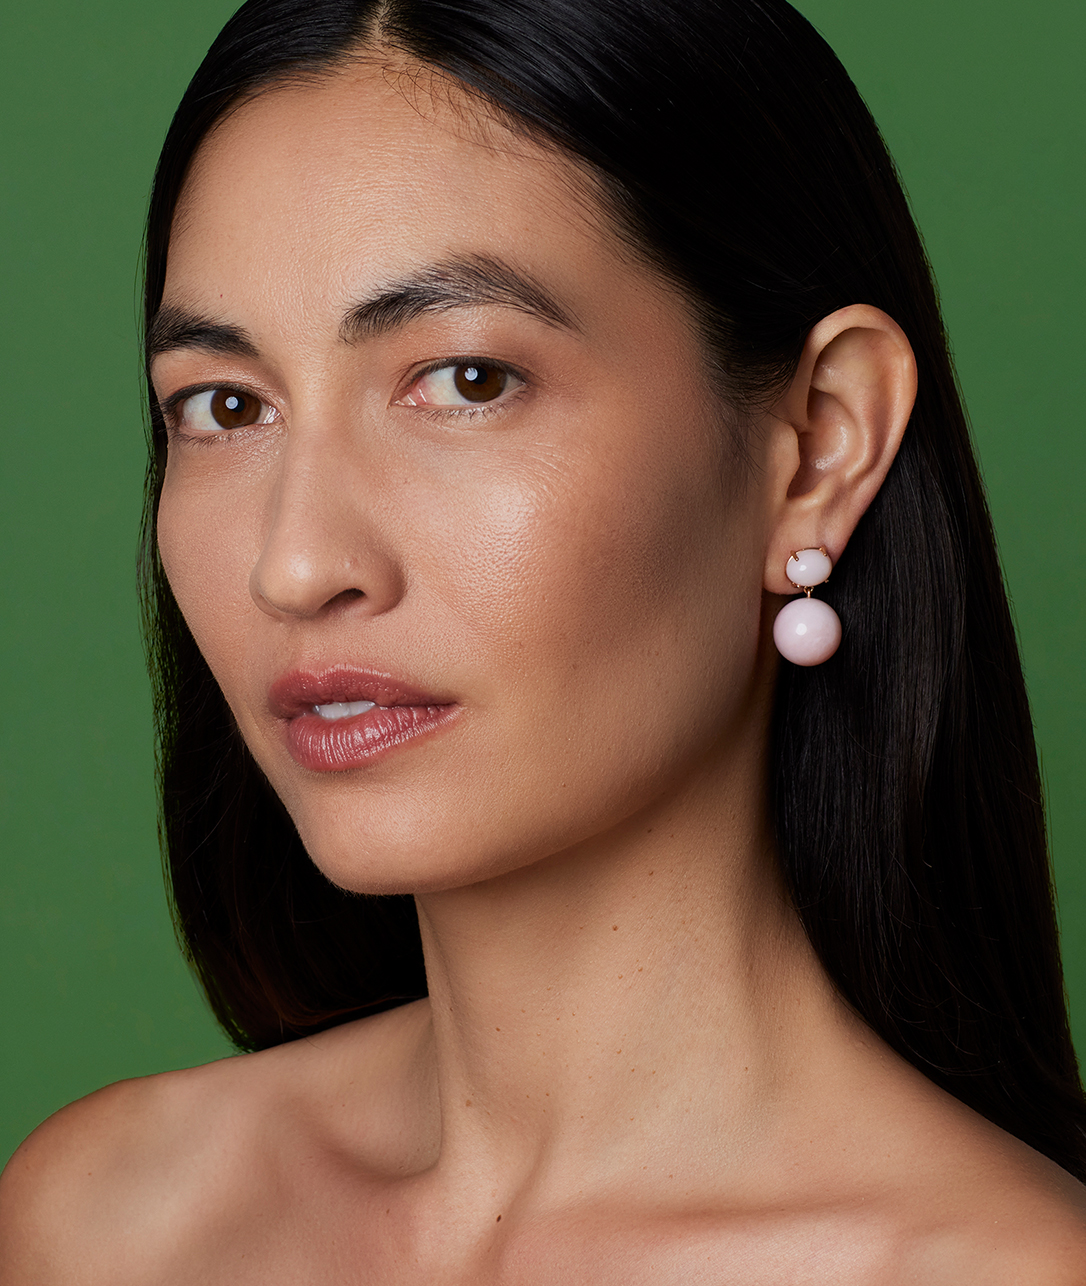 Our Oval Gumball Earrings check all of the playful luxury boxes.SHOP OVAL GUMBALL EARRINGS